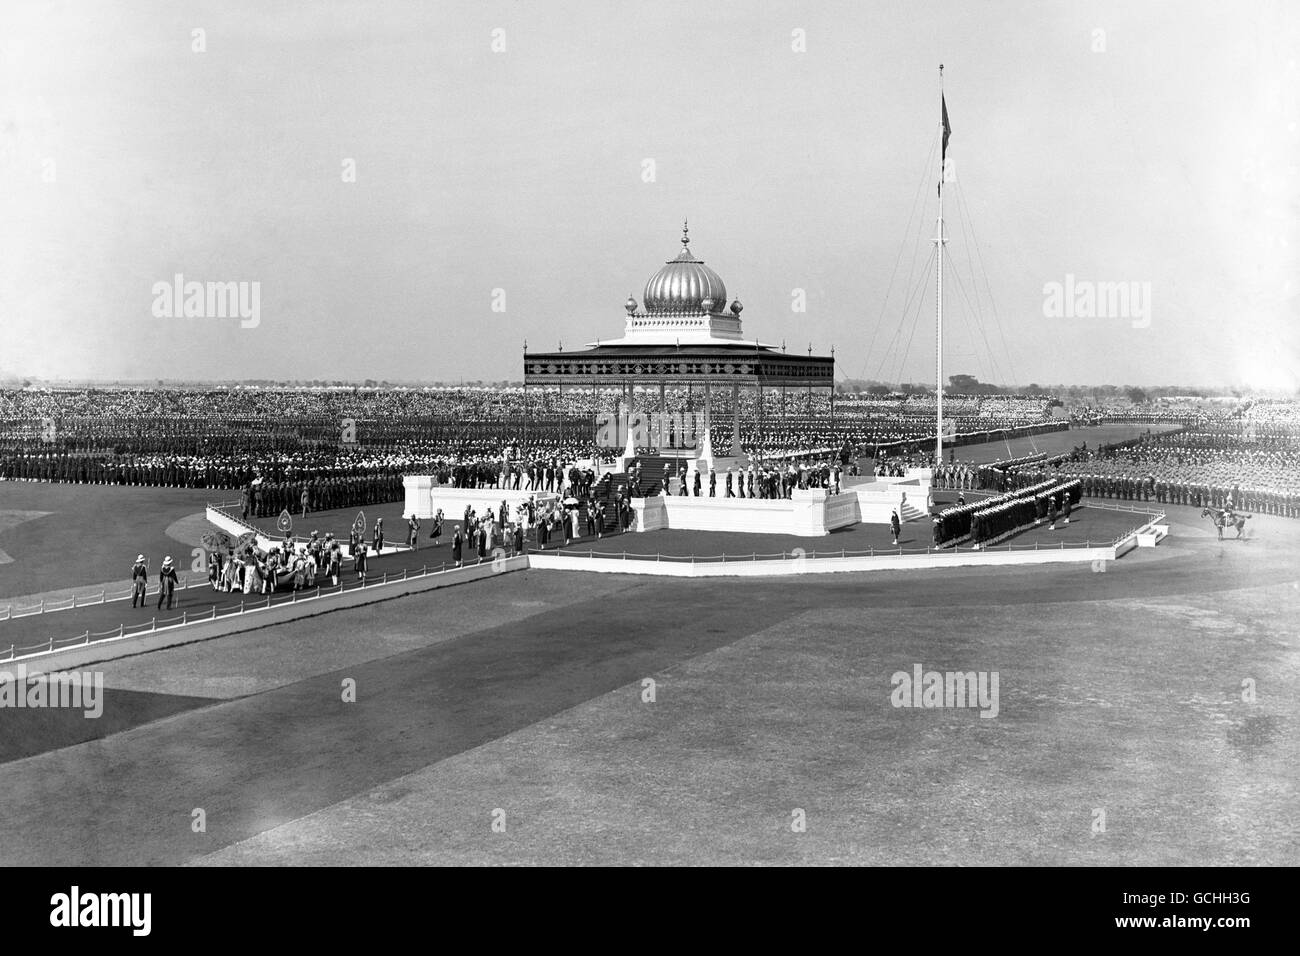 A general view of the Procession from the Dais during the Delhi Durbar of 1911 to mark the coronation of the King George V. Stock Photo